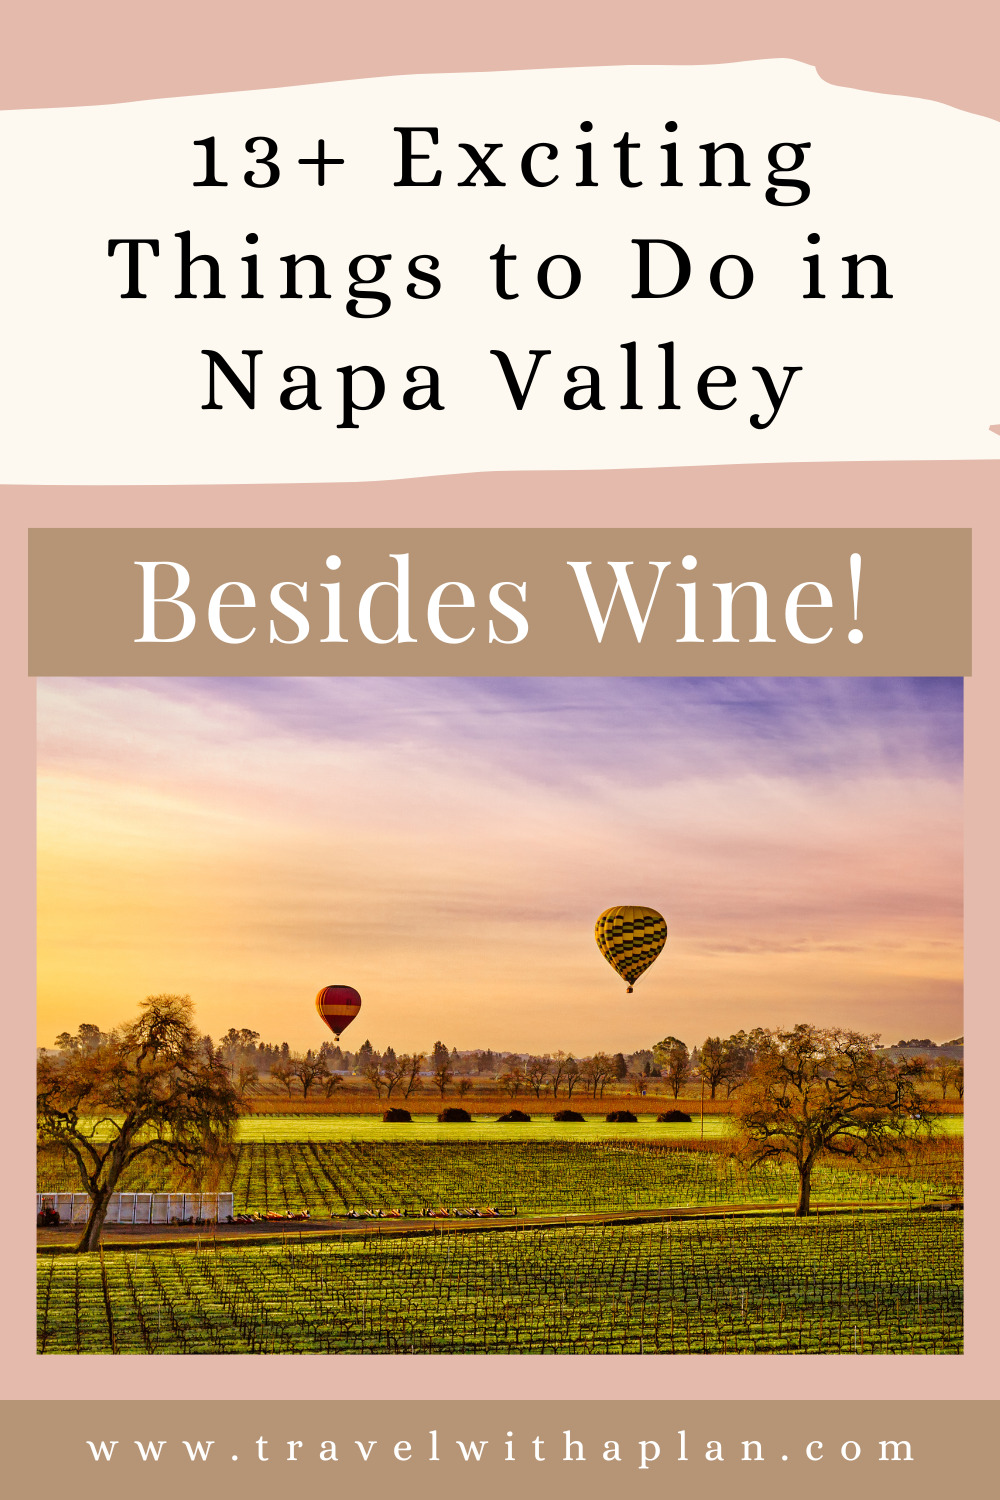 Check out the best things to do in Napa besides wine and wineries!  Though we love our wine, we also love the beautiful lakes, shops, and fantastic outdoor activities in Napa Valley!  #familytravel #NapaCalifornia #thingstodoinNapa